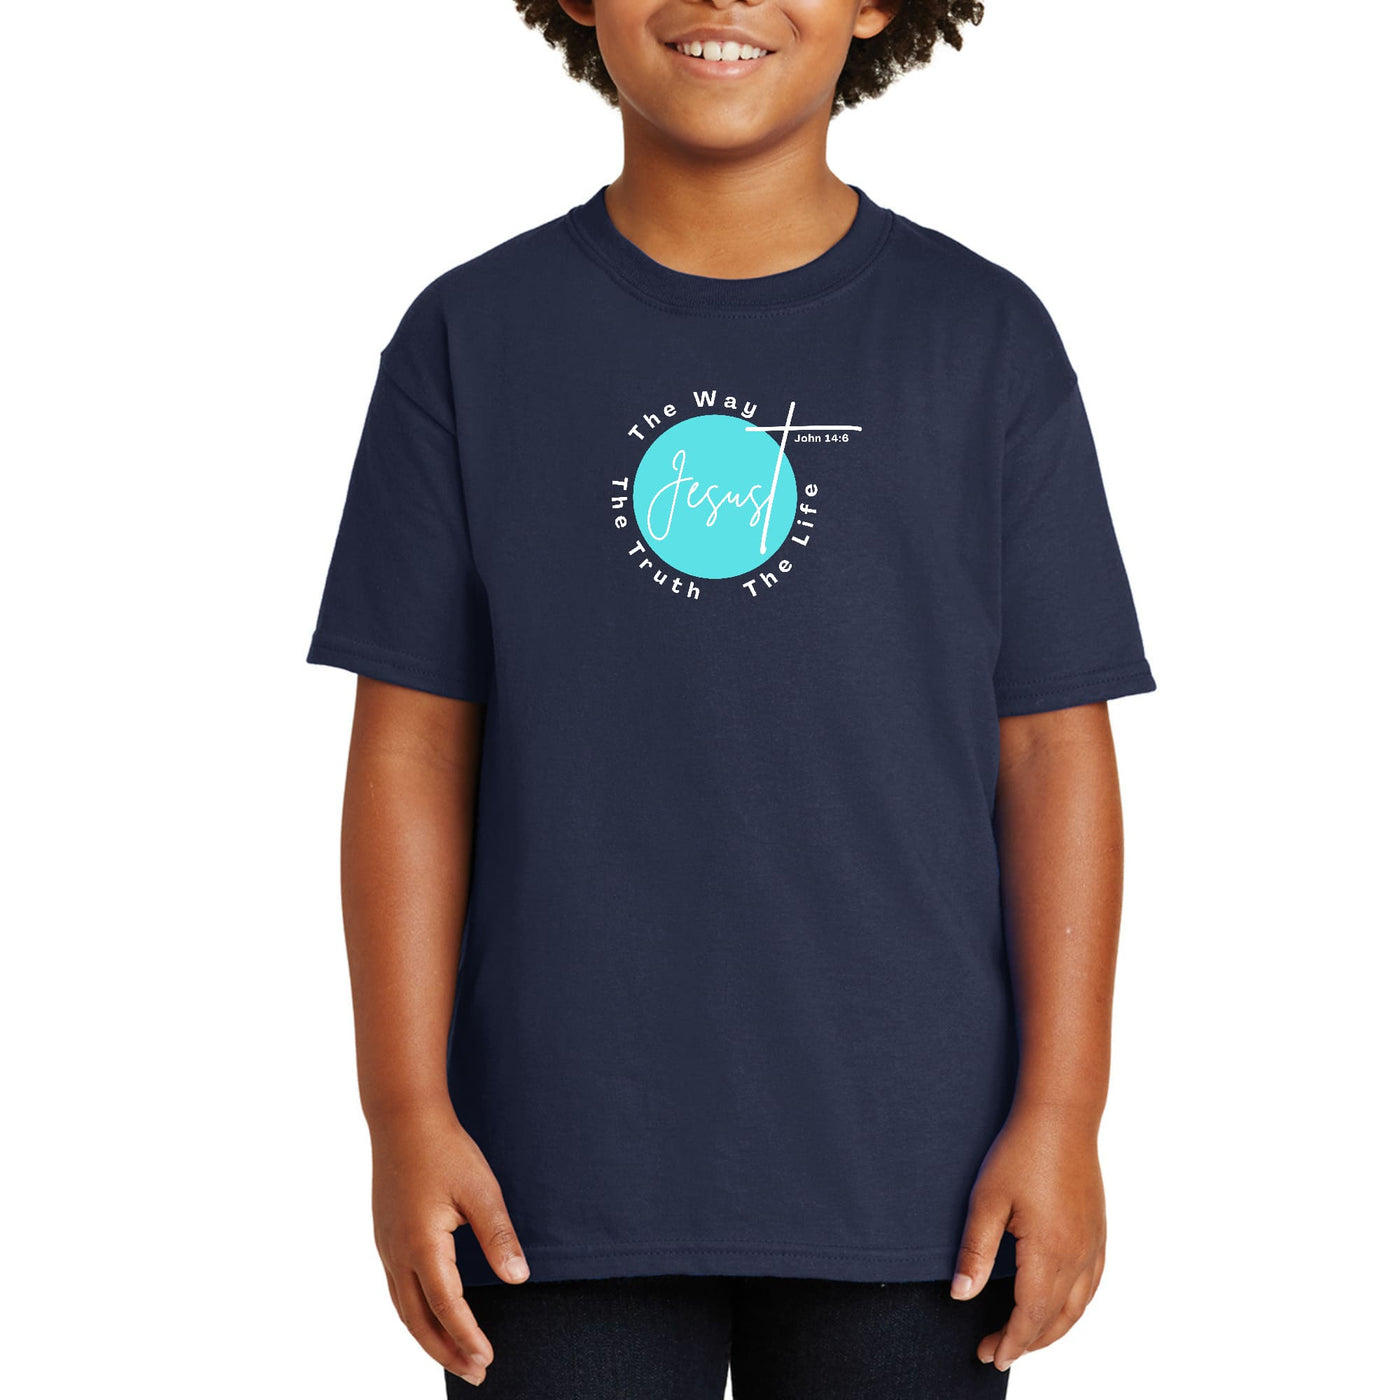 Youth Short Sleeve T-shirt The Truth The Way The Life - Youth | T-Shirts